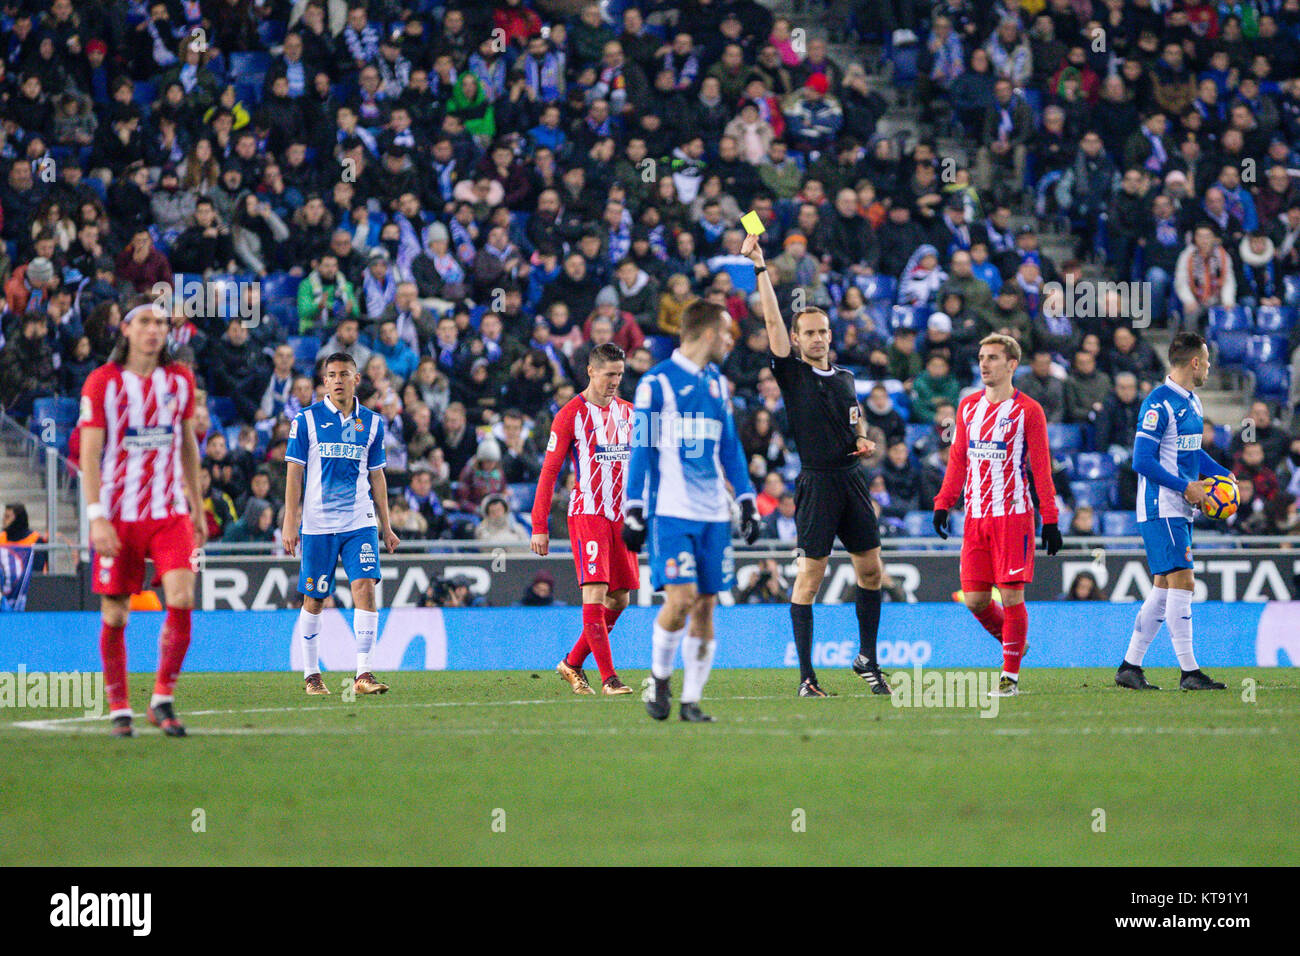 Barcelona, Spain. 22nd Dec, 2017. The referee, shows the yellow card to Atlético Madrid midfielder Saul Niguez (8) during the match between RCD Espanyol v Atletico Madrid, for the round 17 of the Liga Santander, played at RCDE Stadium on 22nd December 2017 in Barcelona, Spain. (Credit: GTO/Urbanandsport/Gtres Online) Credit: Gtres Información más Comuniación on line, S.L./Alamy Live News Stock Photo